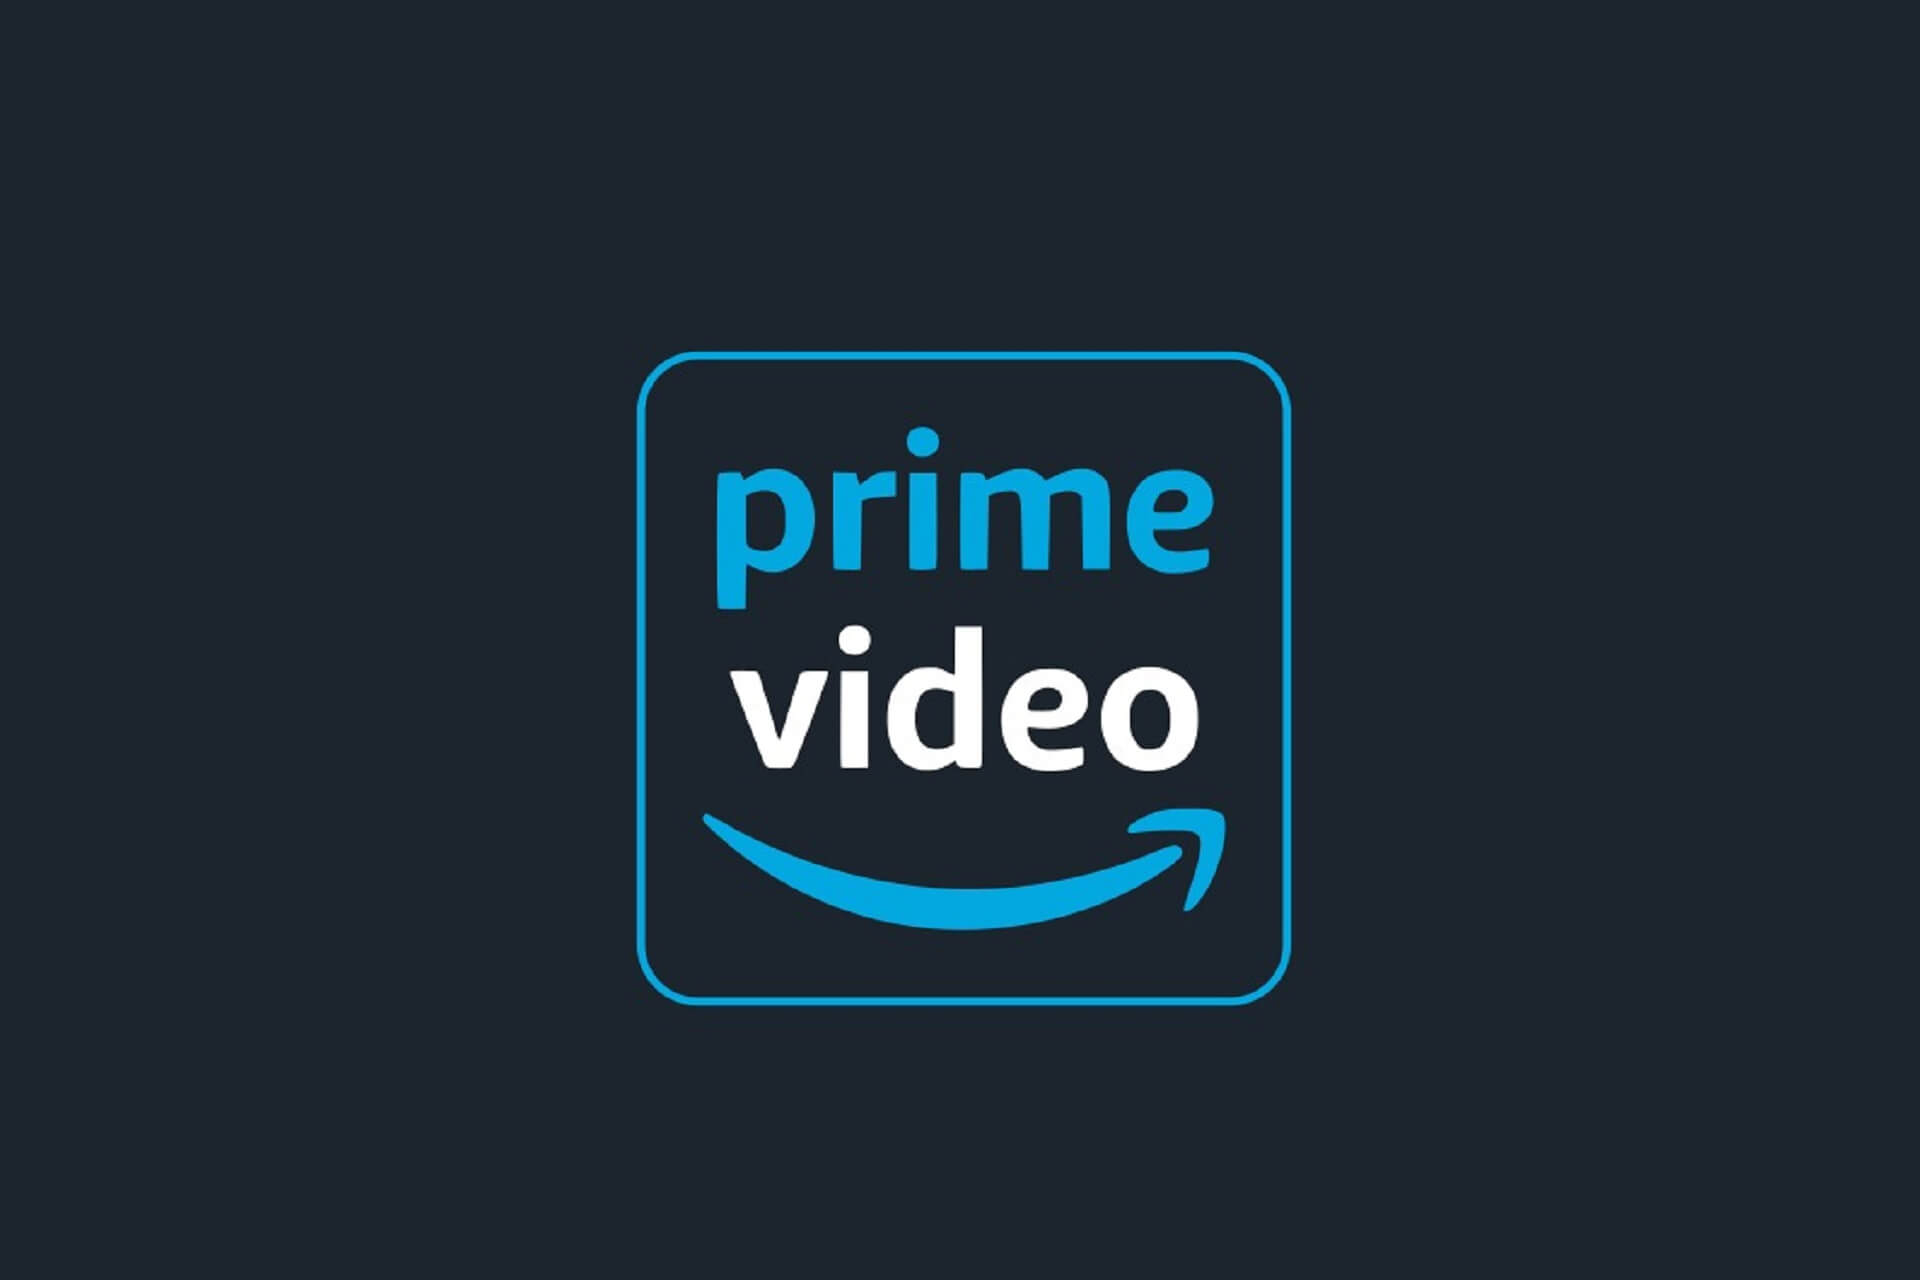 amazon prime video not available in your location